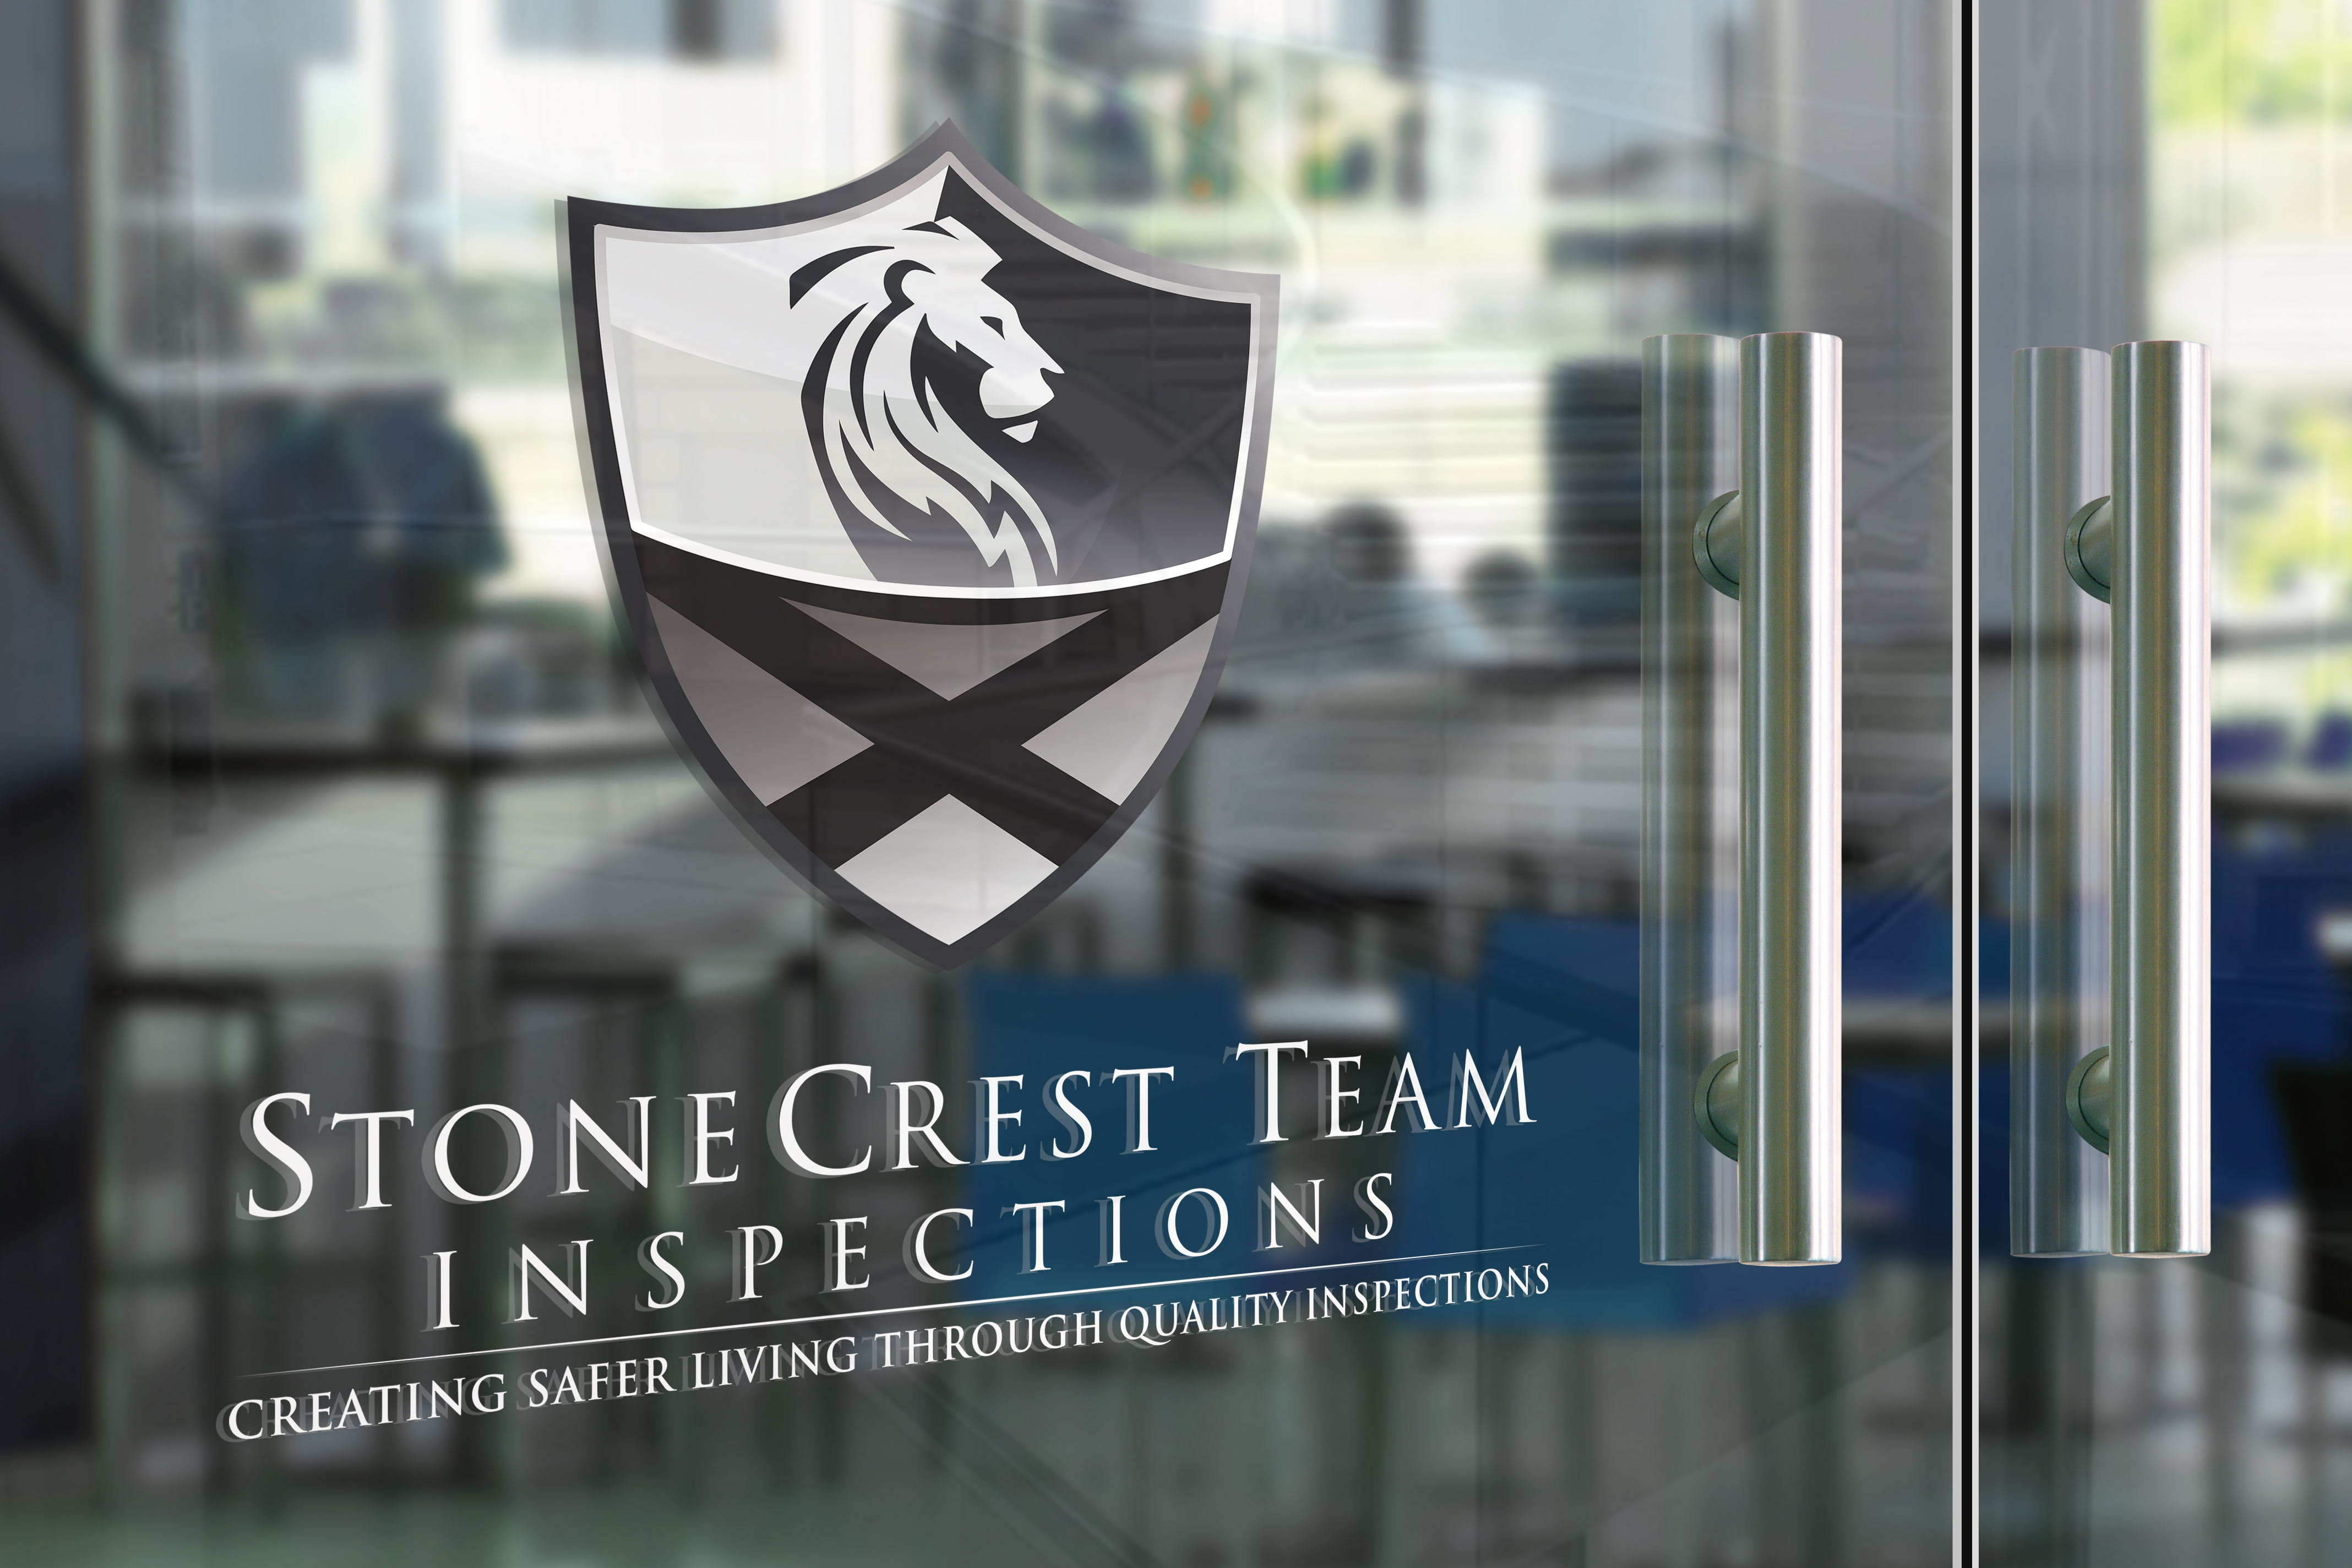 Welcome to StoneCrest Team!